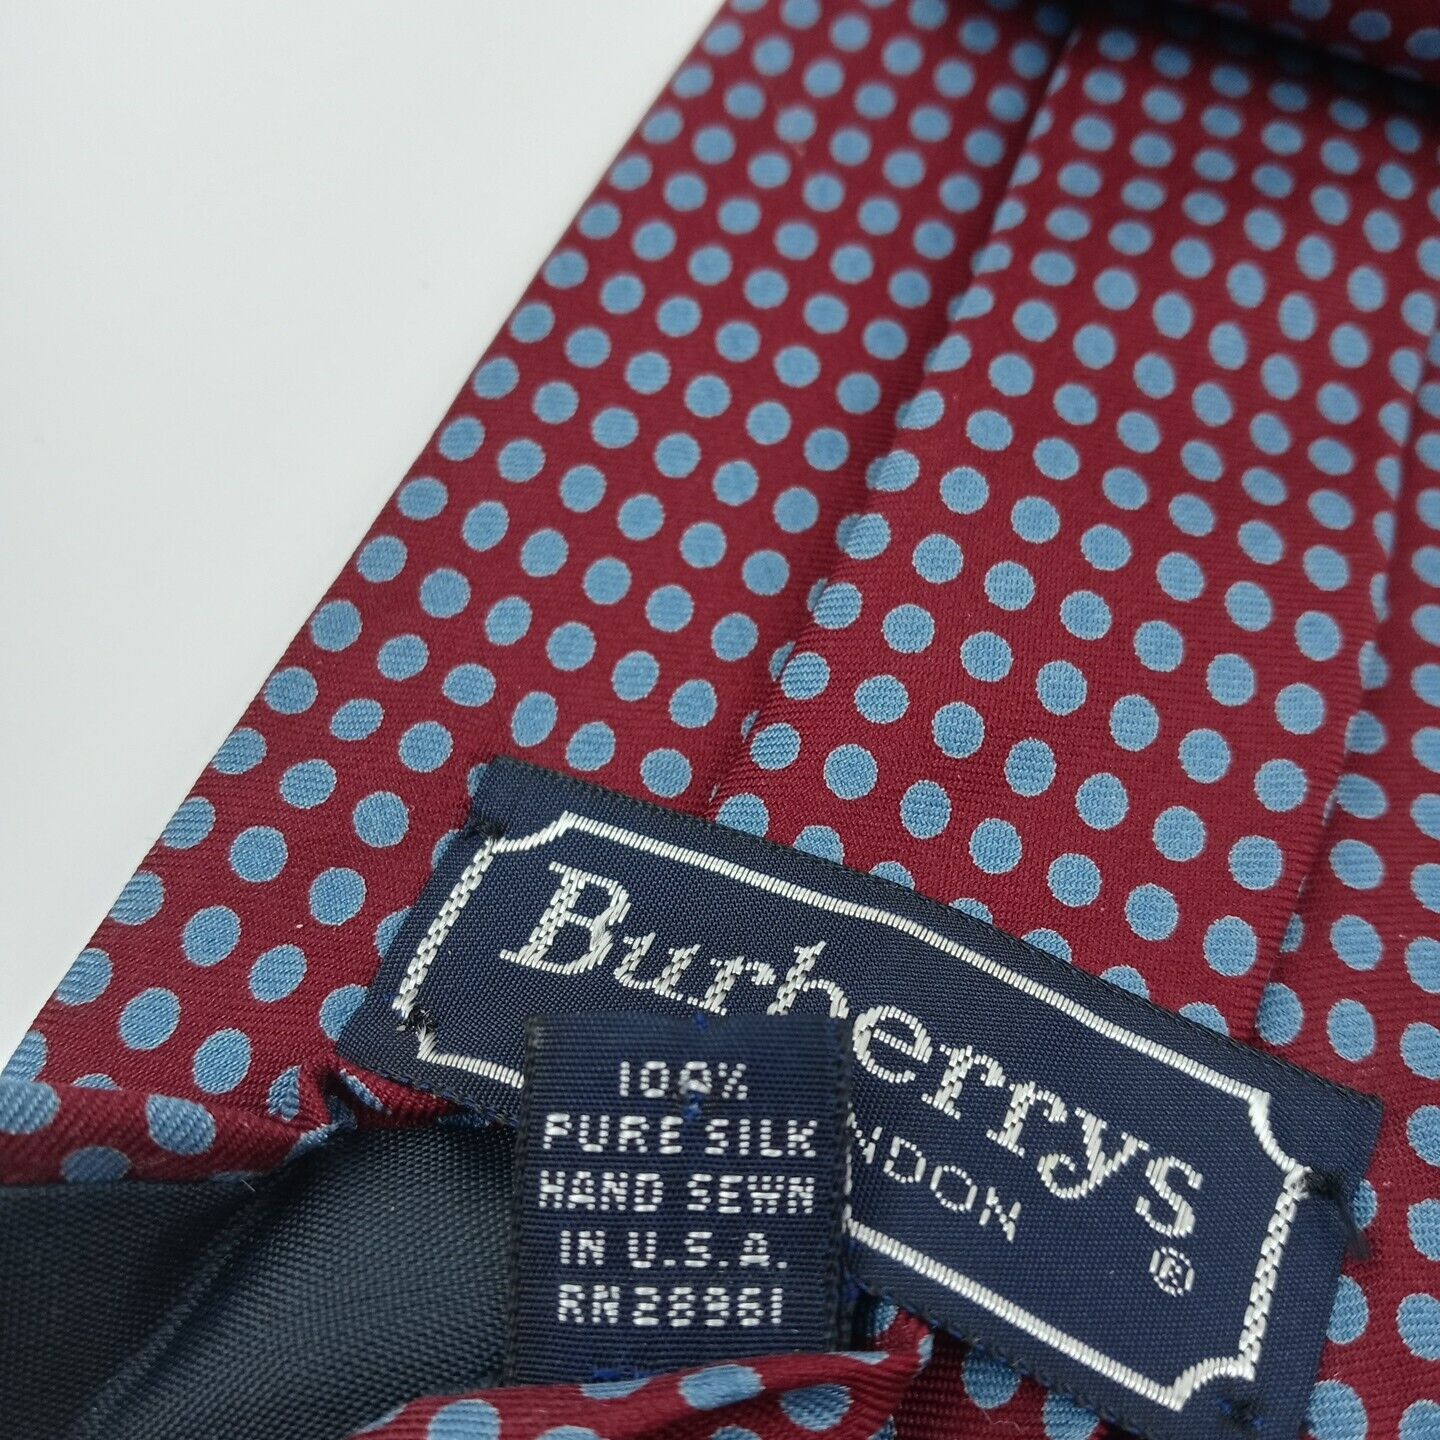 Burberrys Of London Tie 58x4 Hand Sewn in USA 100… - image 8